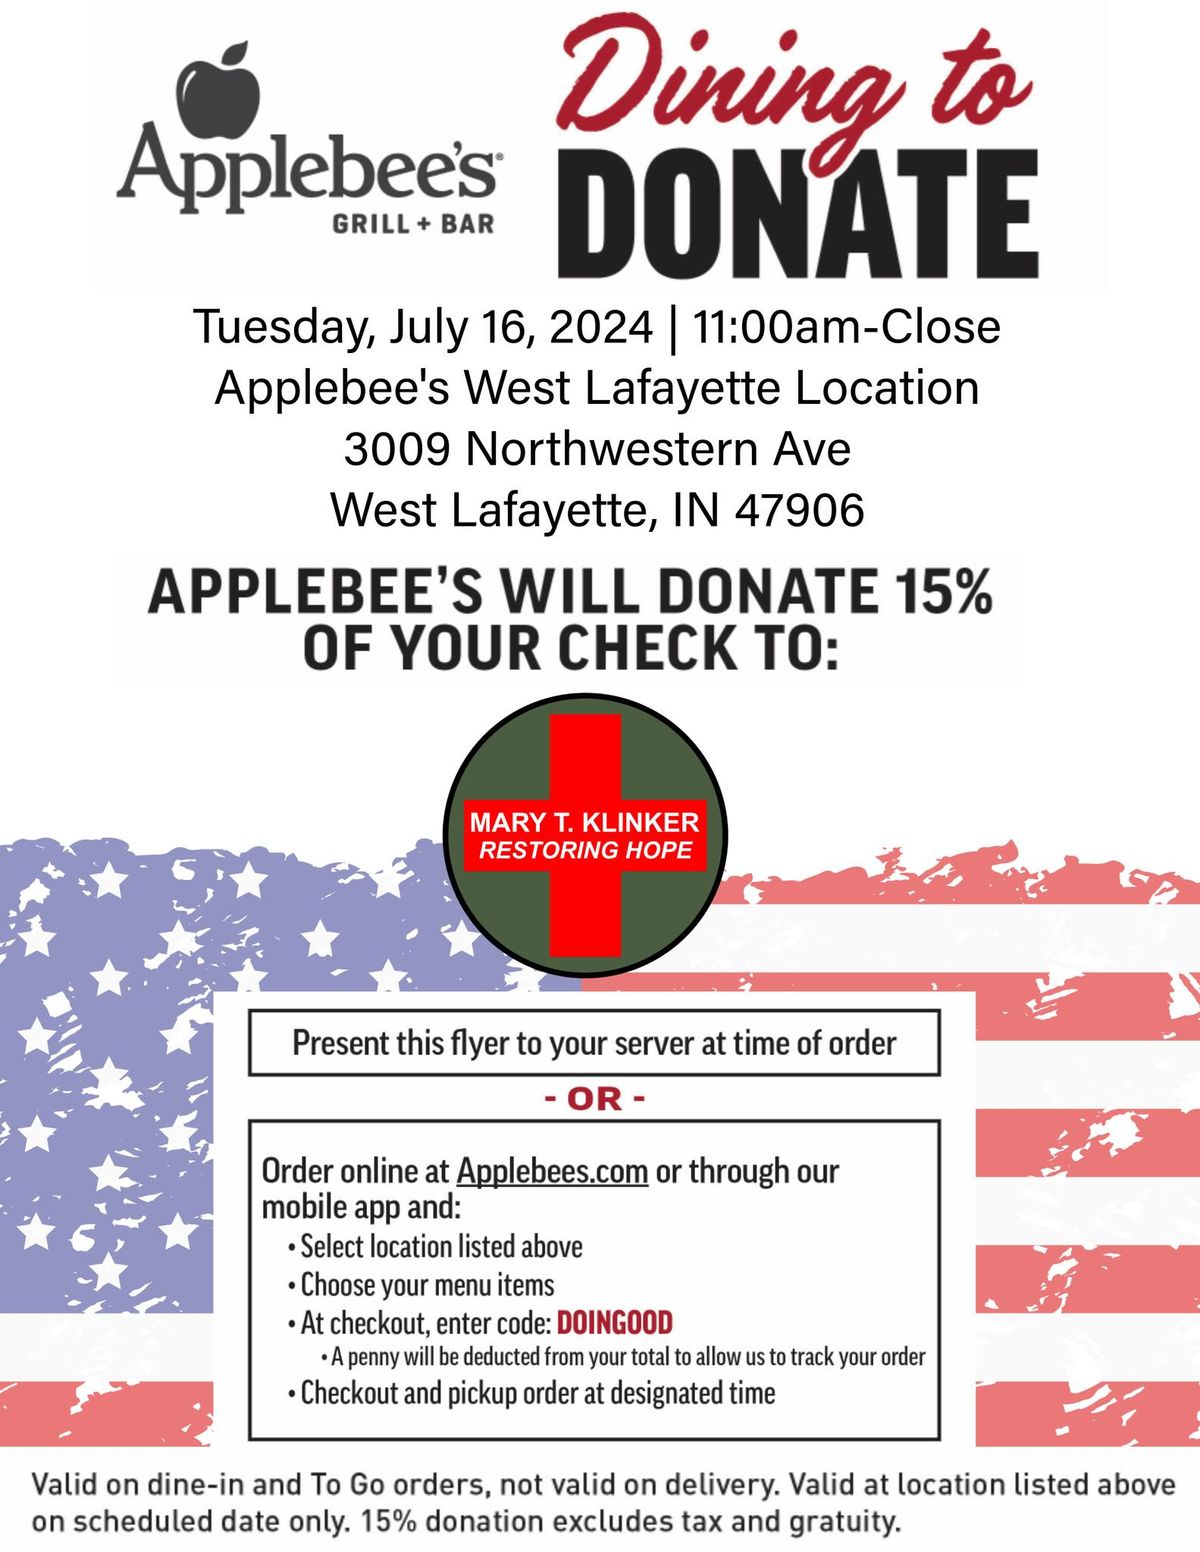 Mark your dinner plans for July 16th at Applebee's in West Lafayette